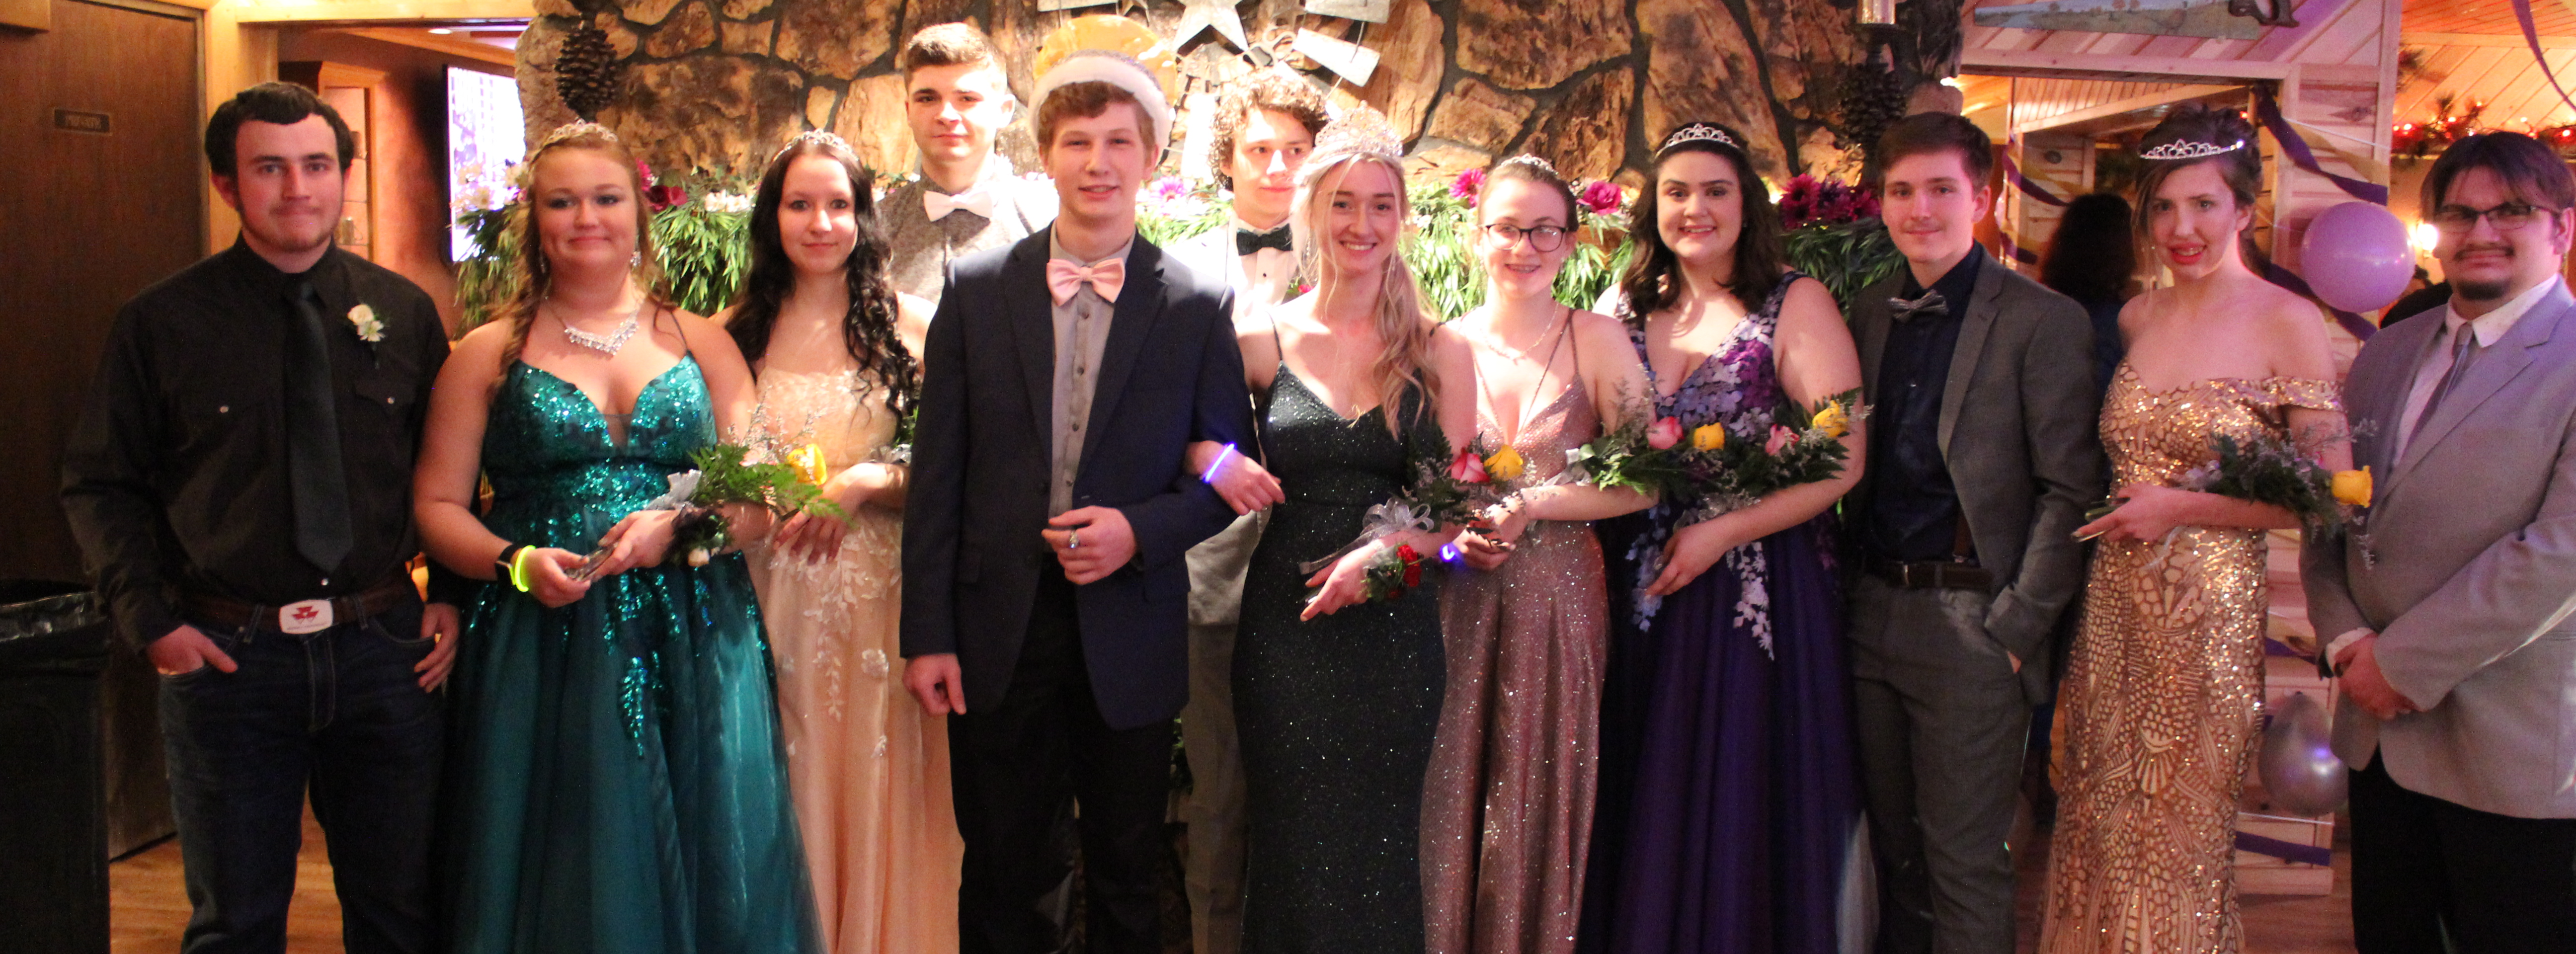 Prom students dressed up